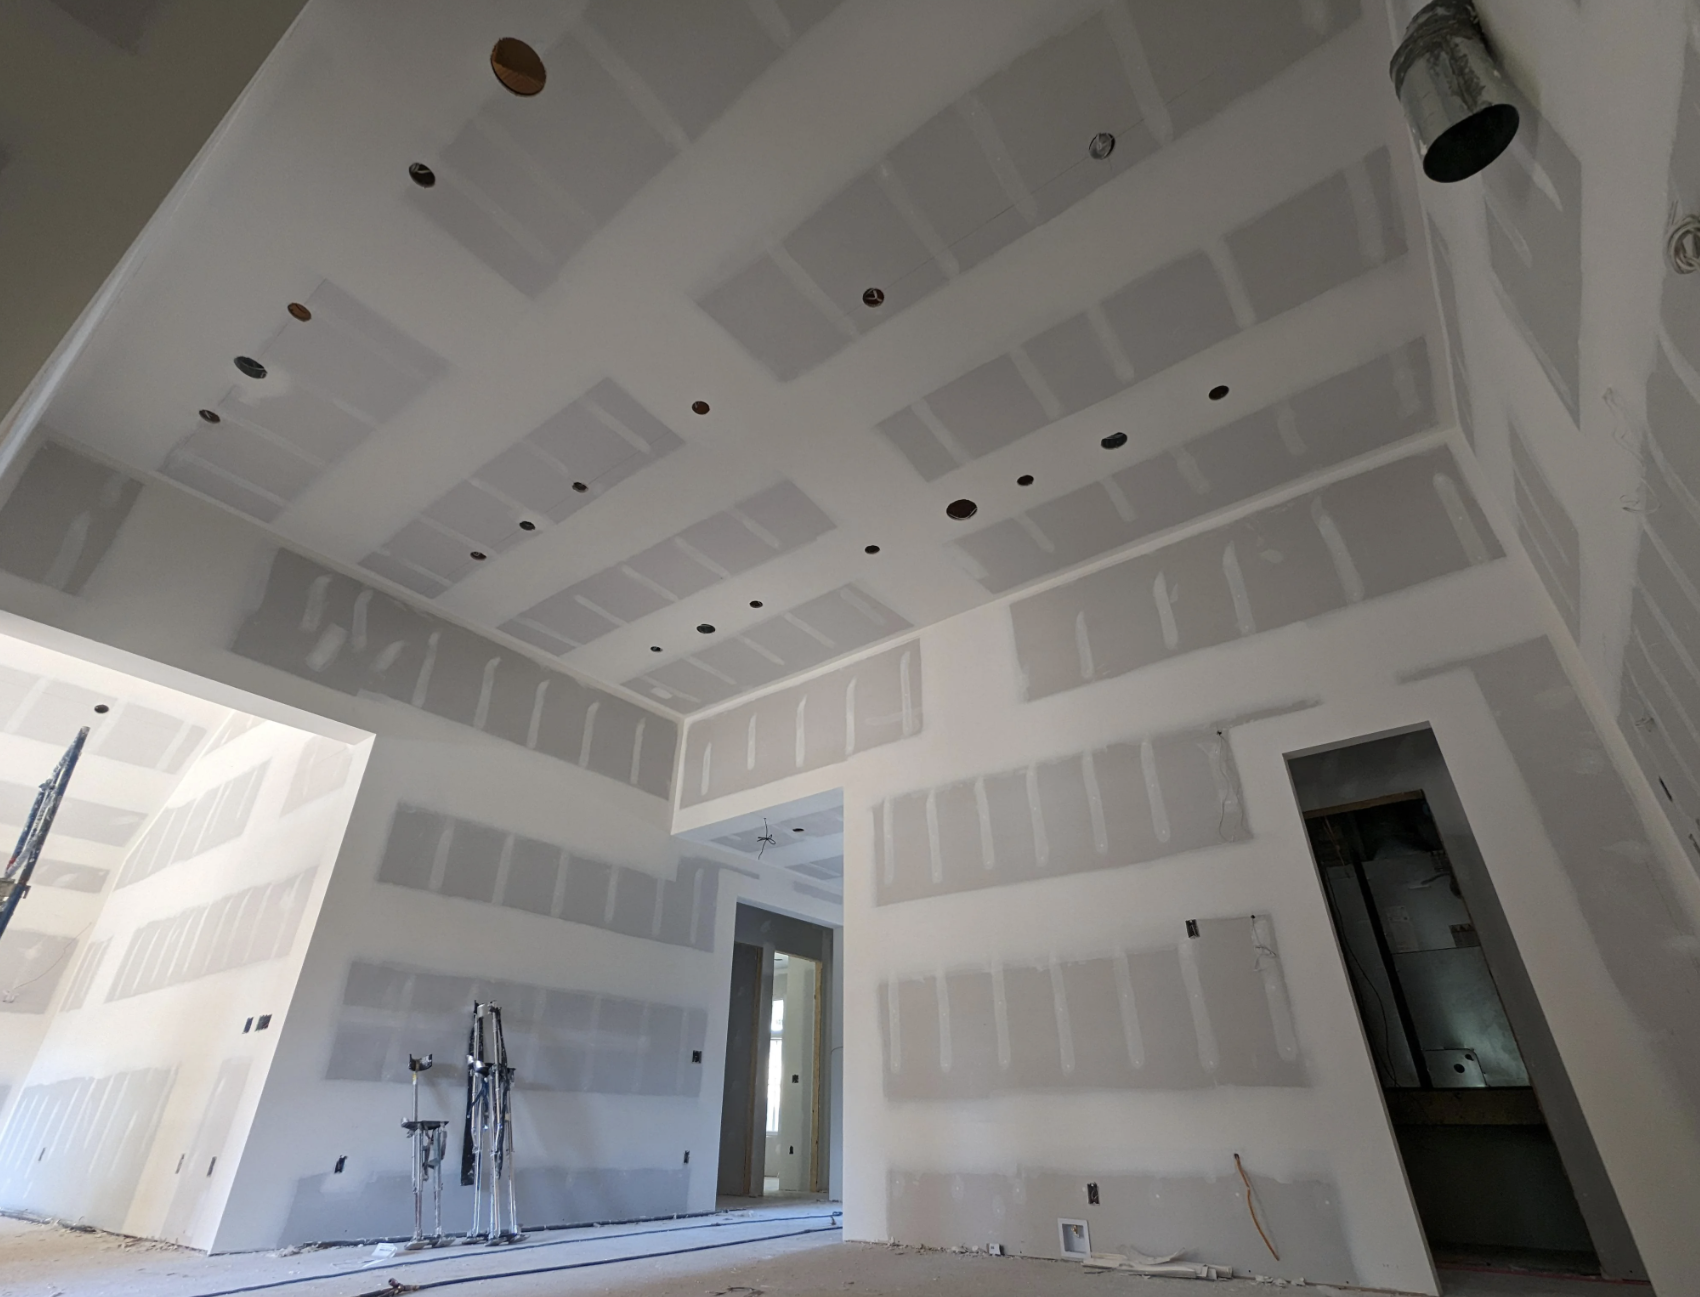 An expert shows off their drywall project